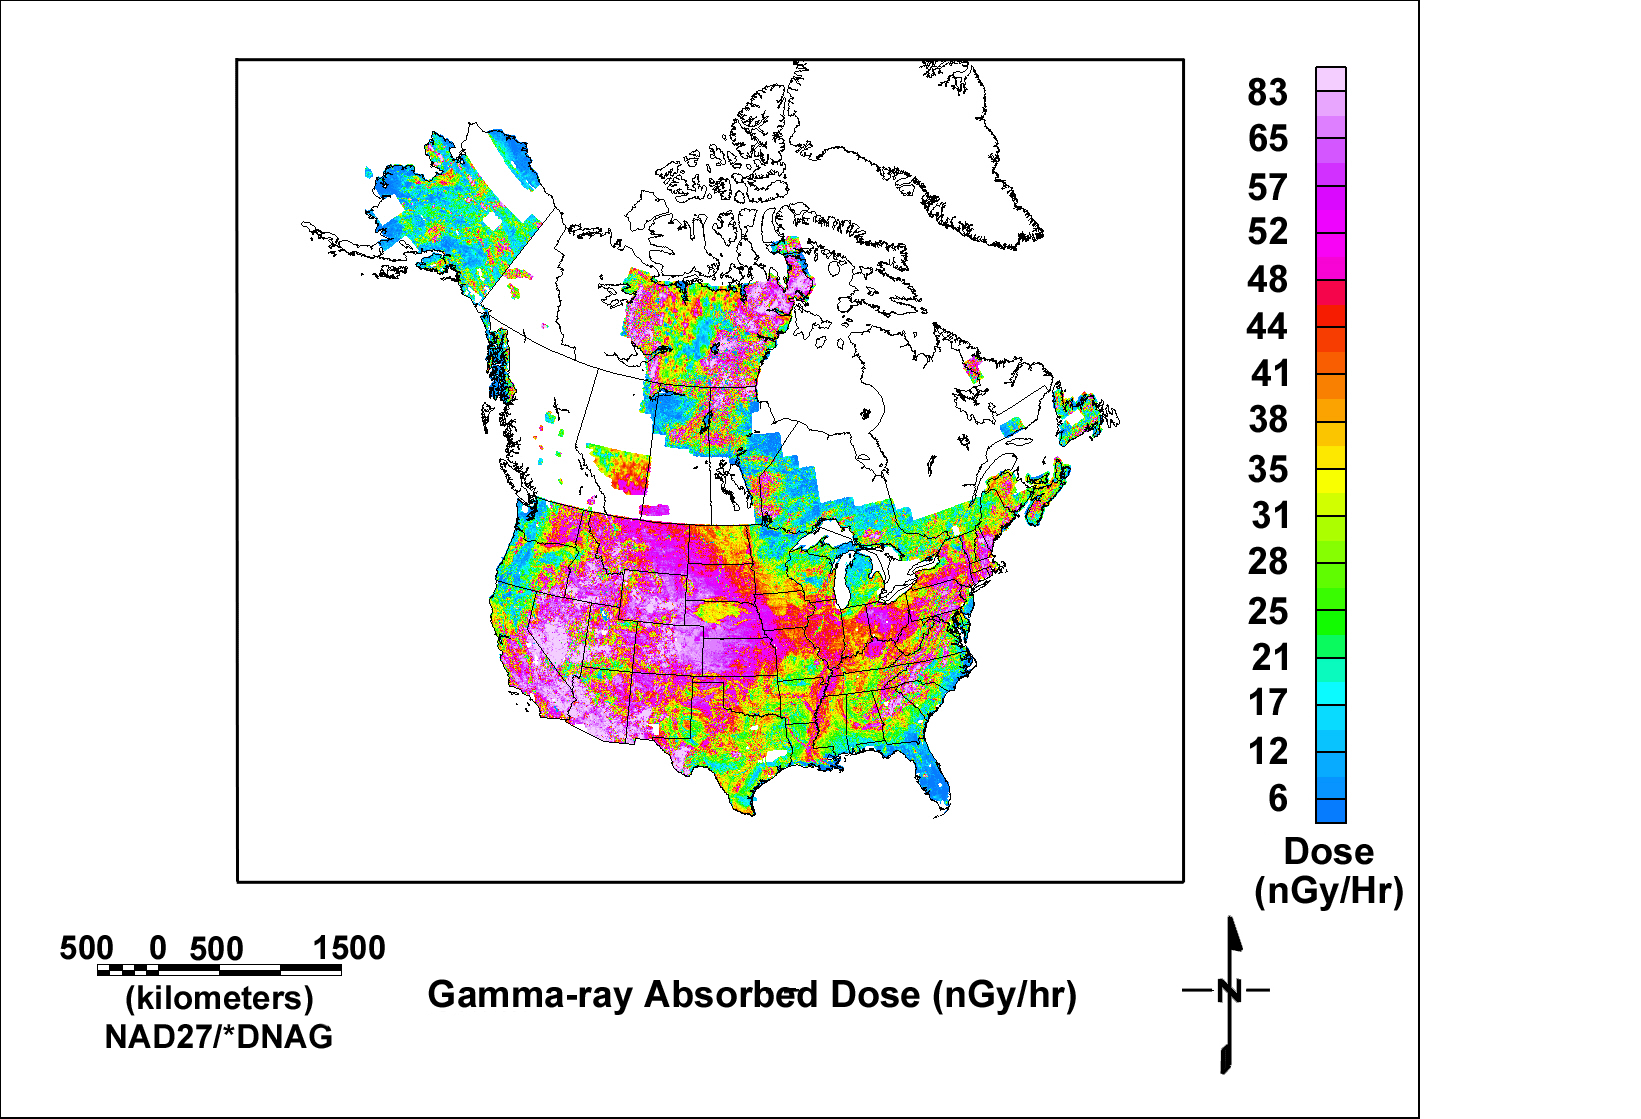 Image of map showing gamma-ray absorbed dose.